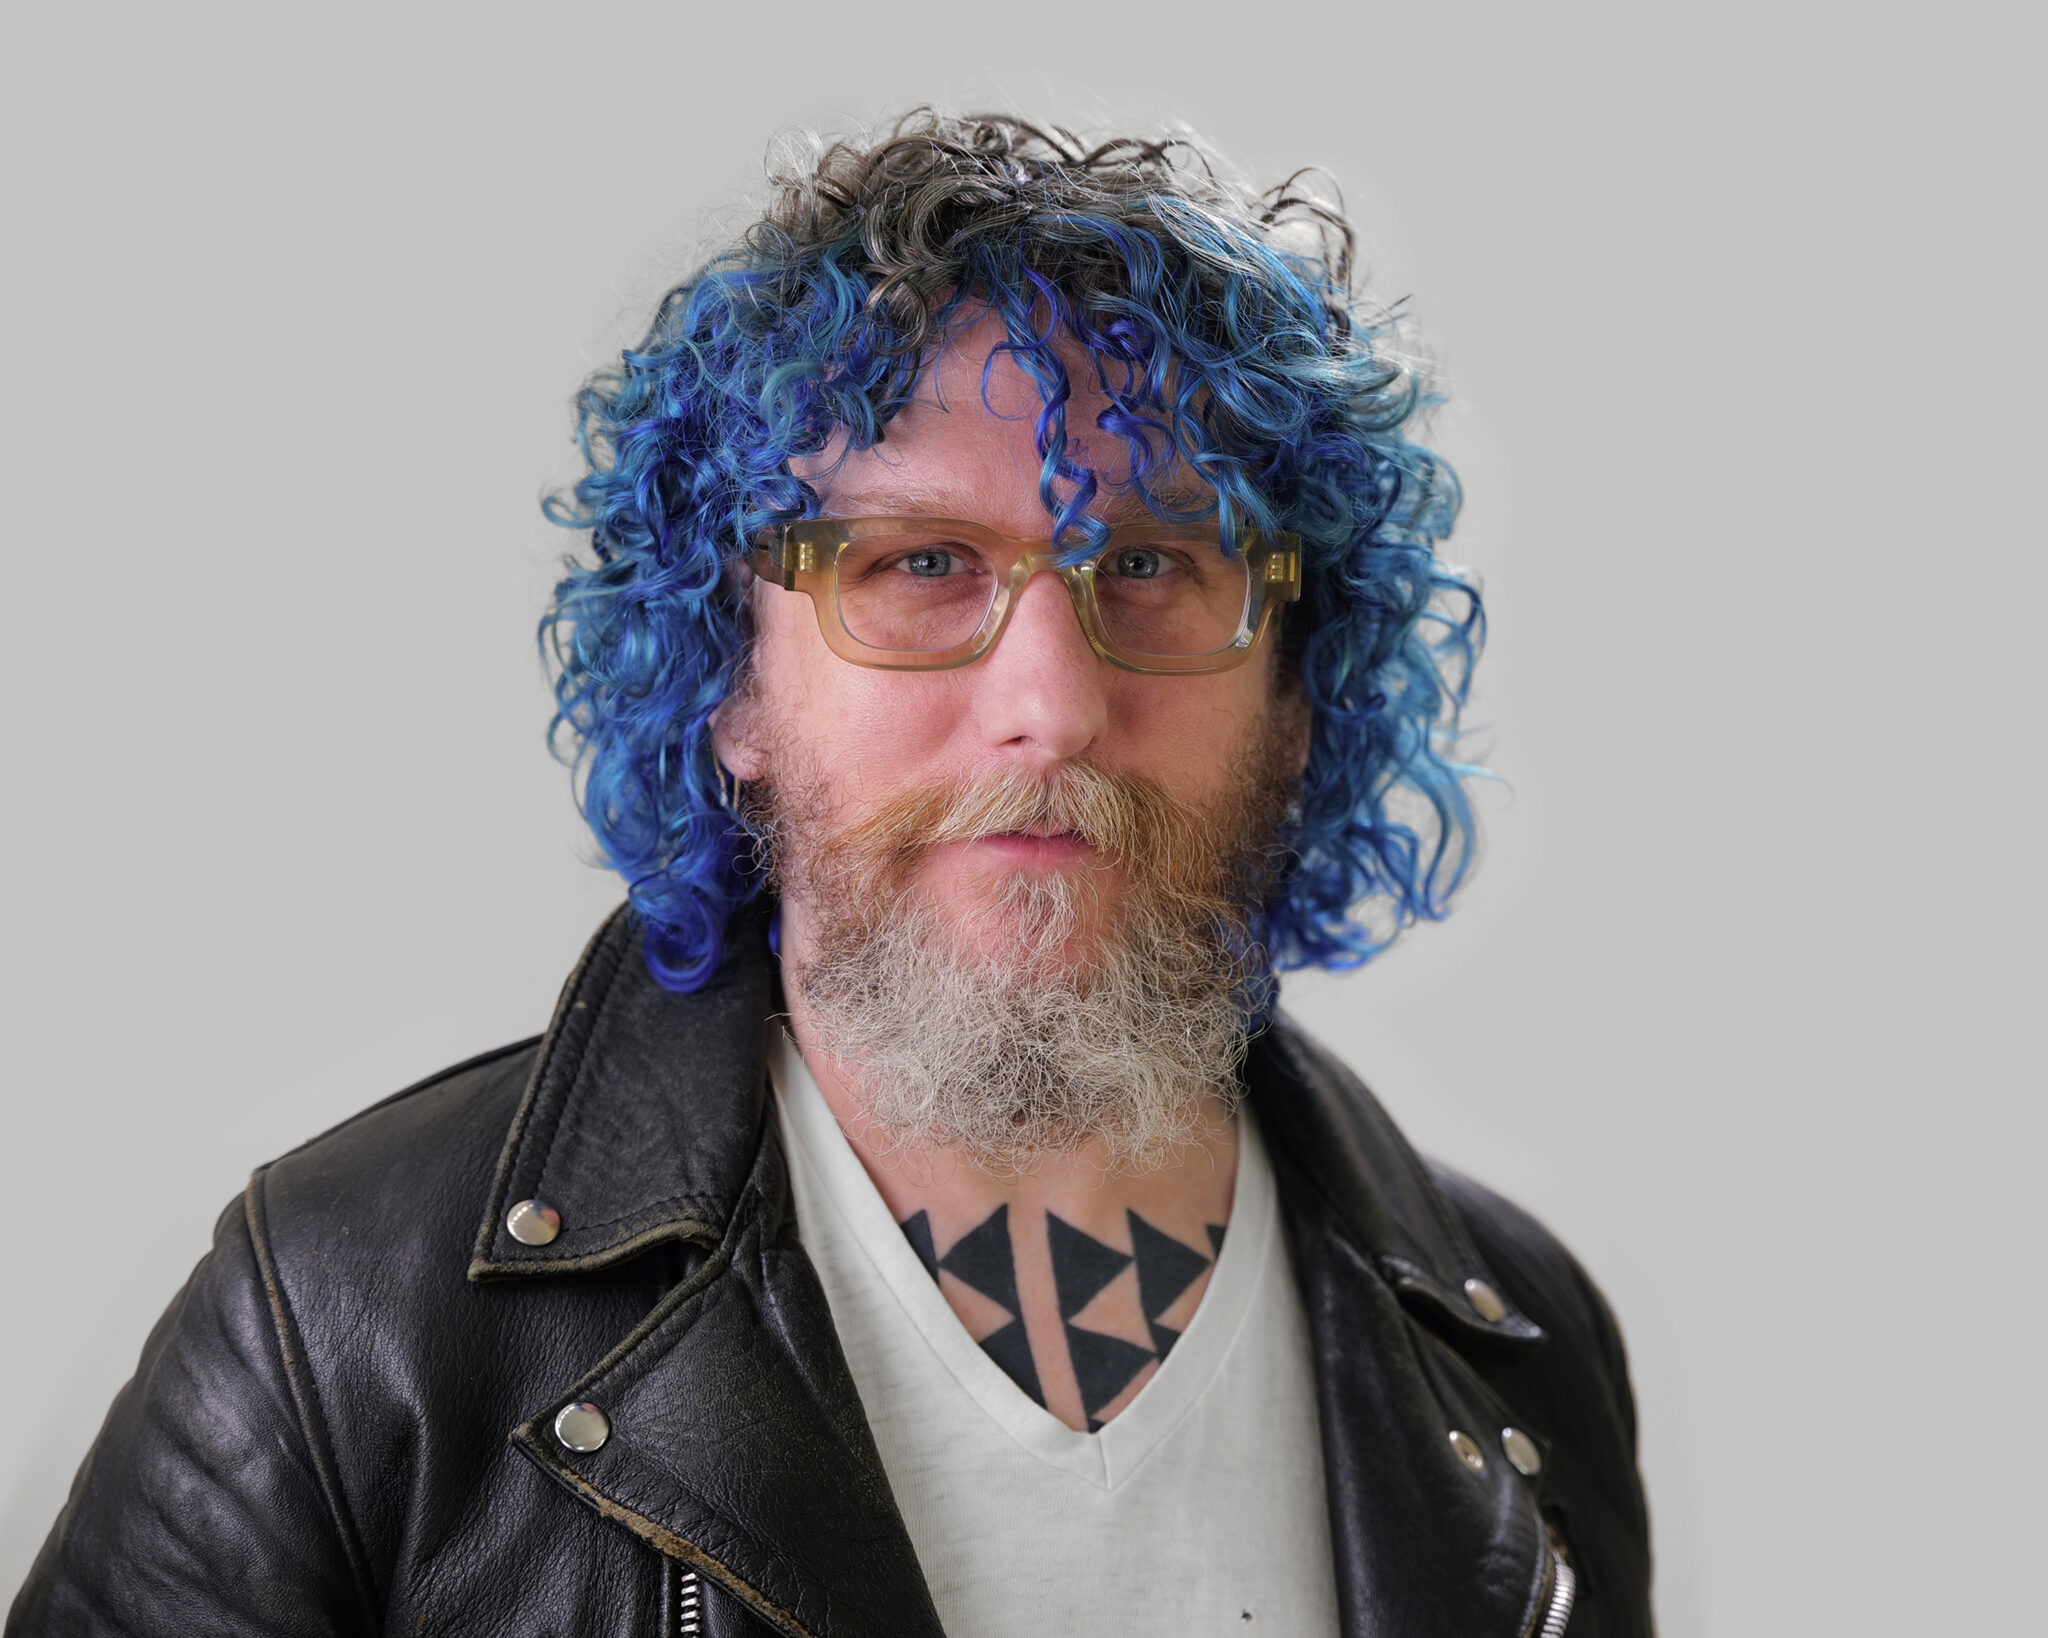 A headshot of Chris, a white person, with blue medium curly hair and white facial hair, wearing glasses, a black leather jacket, gray top and black triangular tattoos on their chest.